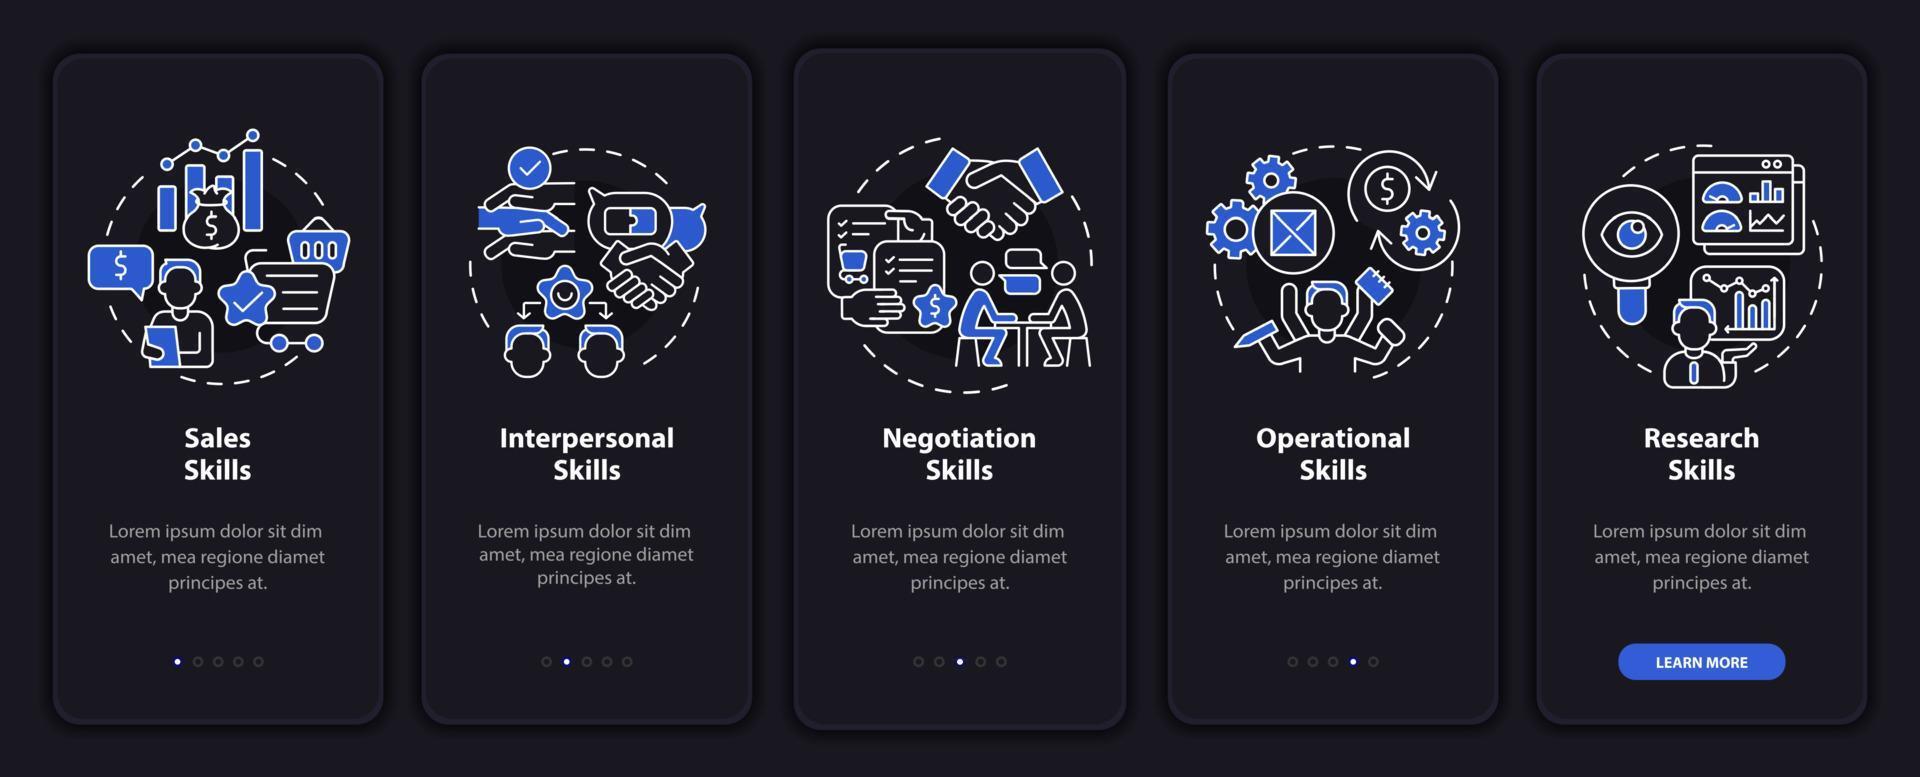 Skills for wholesaler onboarding mobile app page screen. Start business walkthrough 5 steps graphic instructions with concepts. UI, UX, GUI vector template with linear night mode illustrations